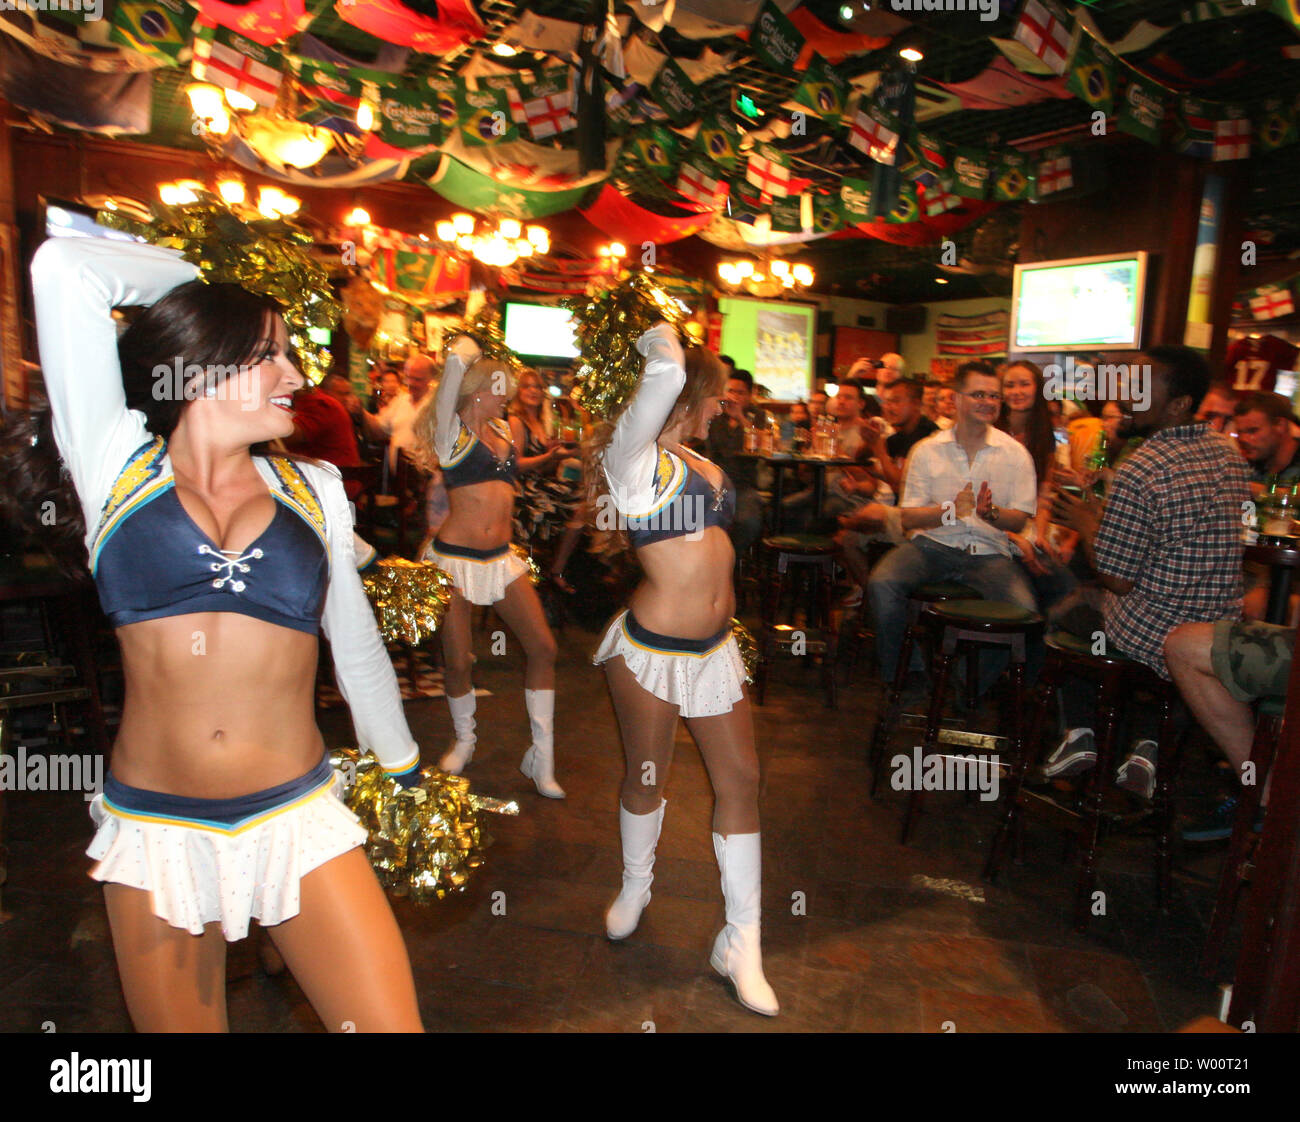 San Diego Chargers cheerleaders perform dance routines in an Irish sports bar, marking the opening of the National Football League's (NFL) 2010 season, in Beijing, September 12, 2010.  NFL live broadcasts will hit Chinese screens for the fourth consecutive year when the new season kicks off.  For Chinese sports fans, there is an extra reason to watch the NFL, as Ed Wang, the Buffalo Bills' rookie offensive tackle, became the first player with direct Chinese ancestry to be selected in the NFL draft.   UPI/Stephen Shaver Stock Photo